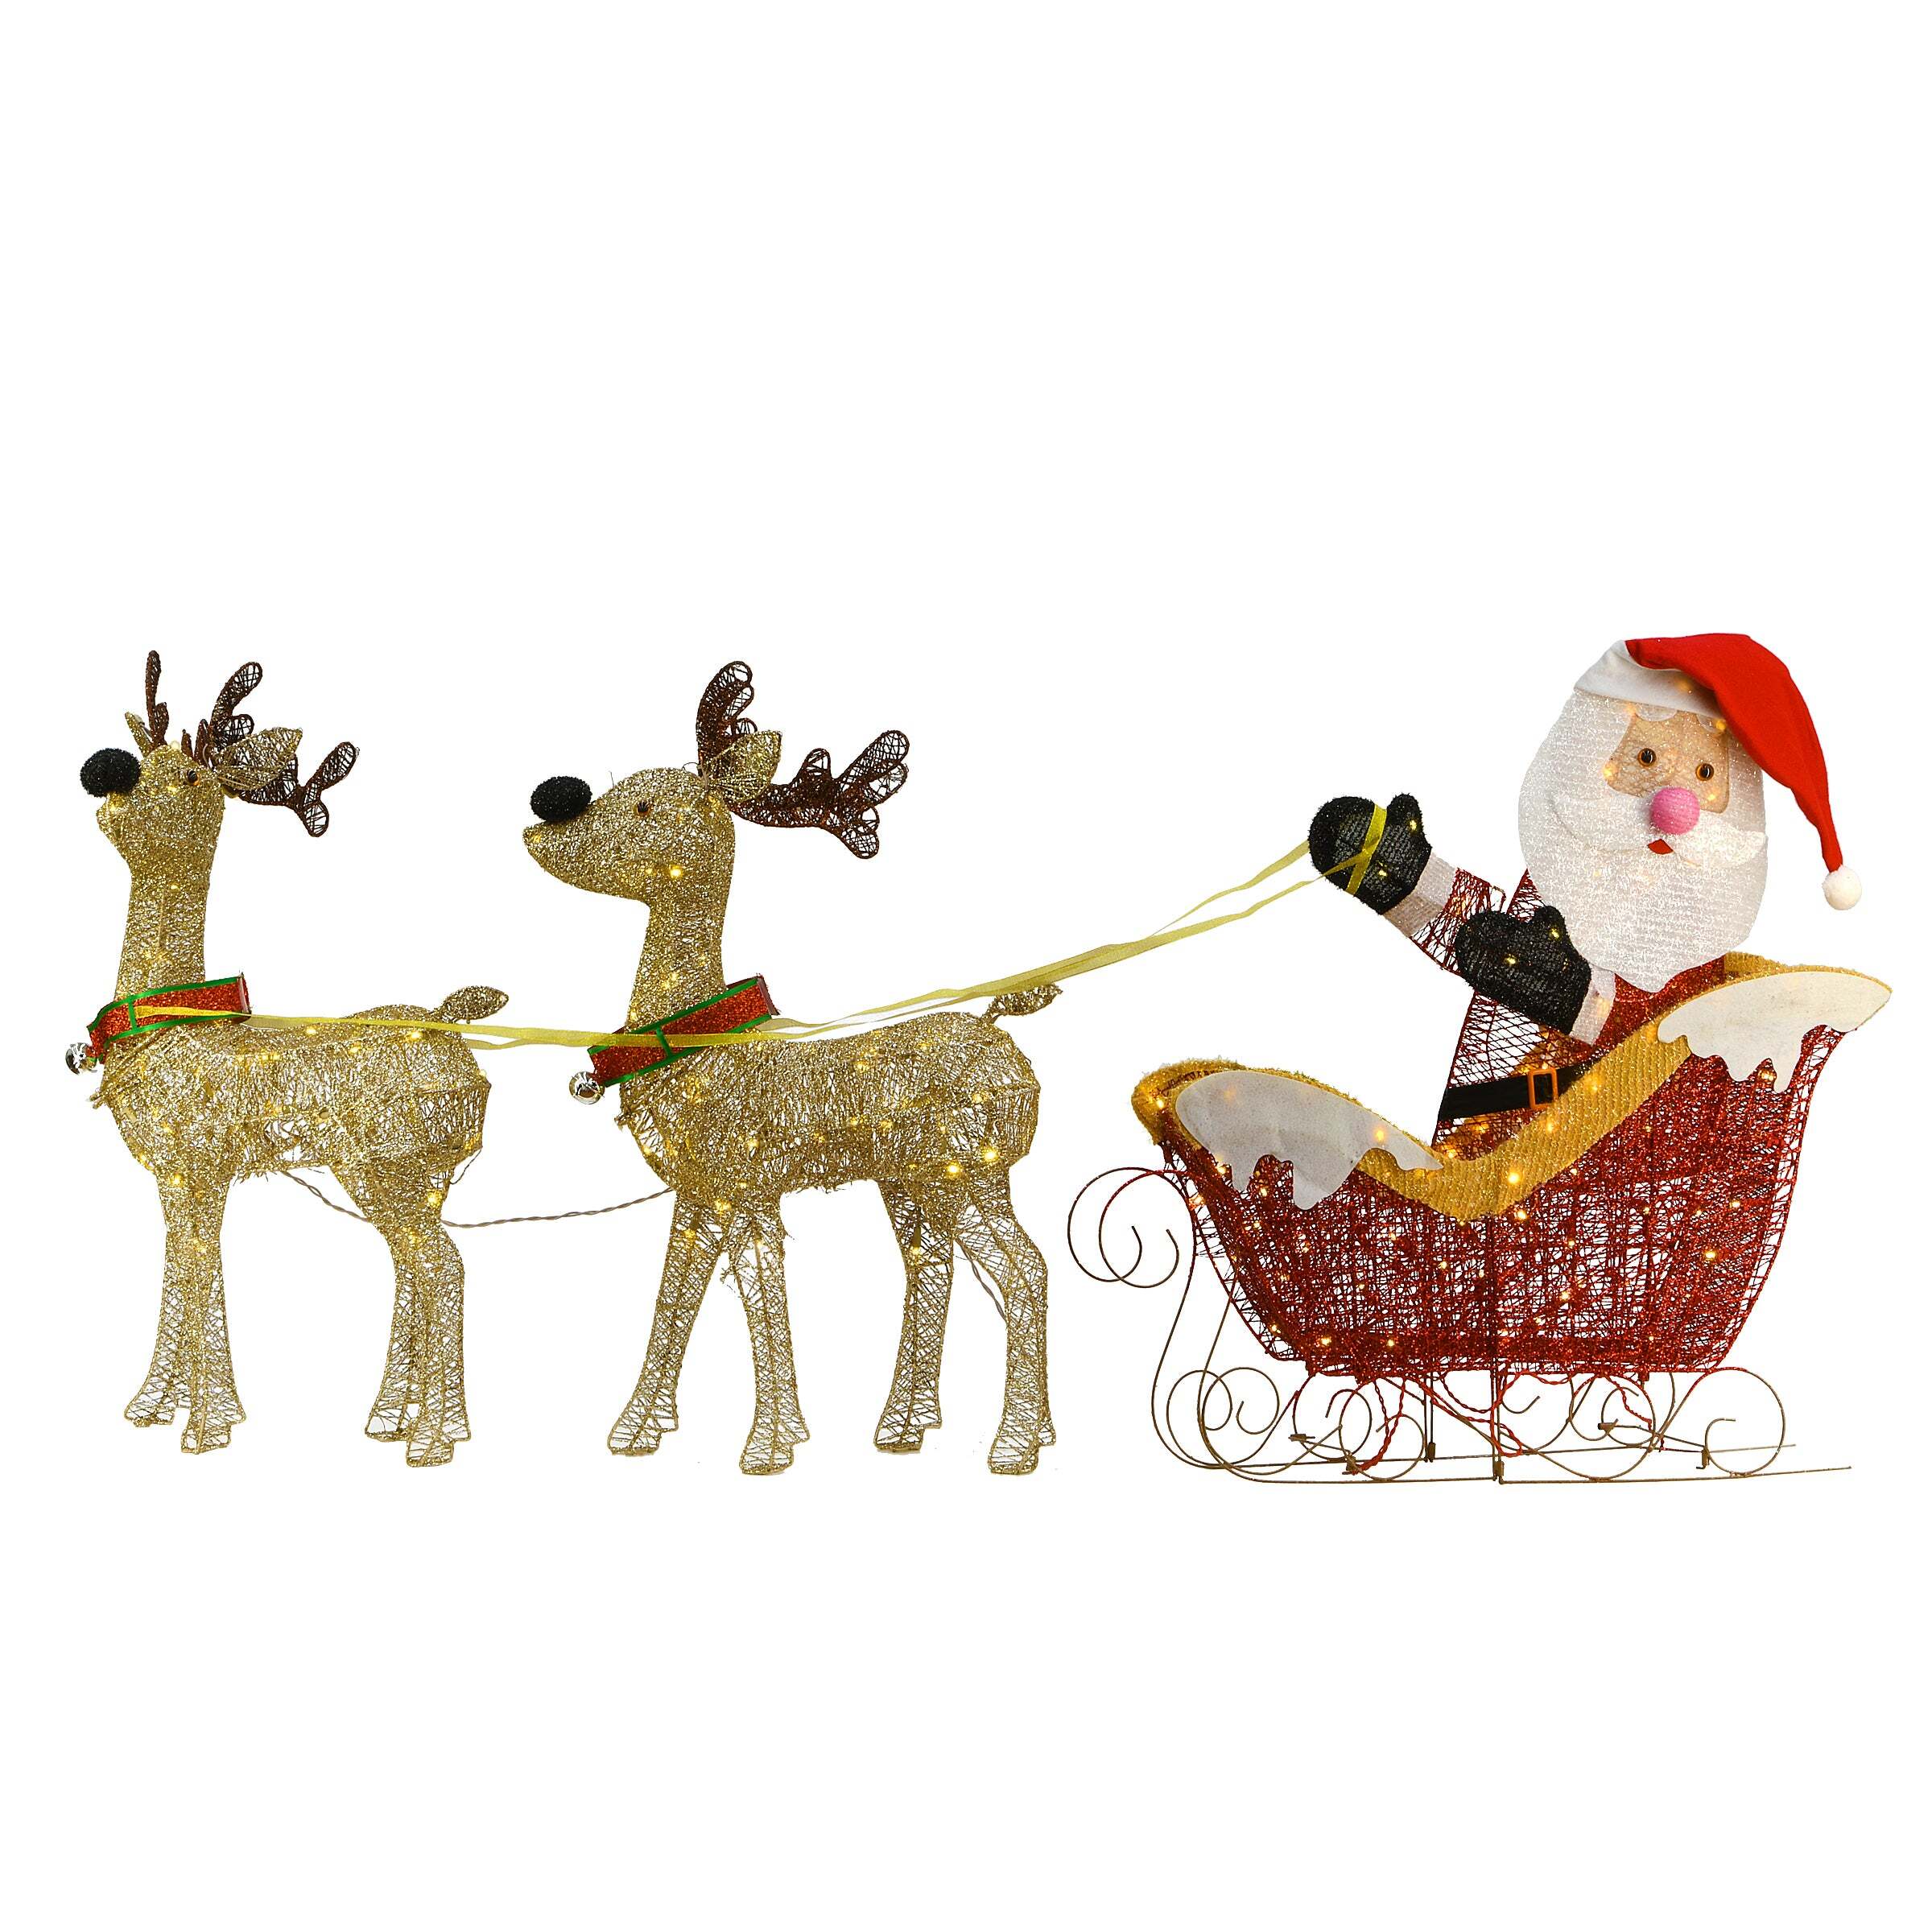 National Tree Company Pre Lit Santa and Reindeer Decoration, Includes Santa, Two Reindeer, Prestrung with 225 Warm White LED Lights, Battery Powered, Christmas Collection, 33 Inches